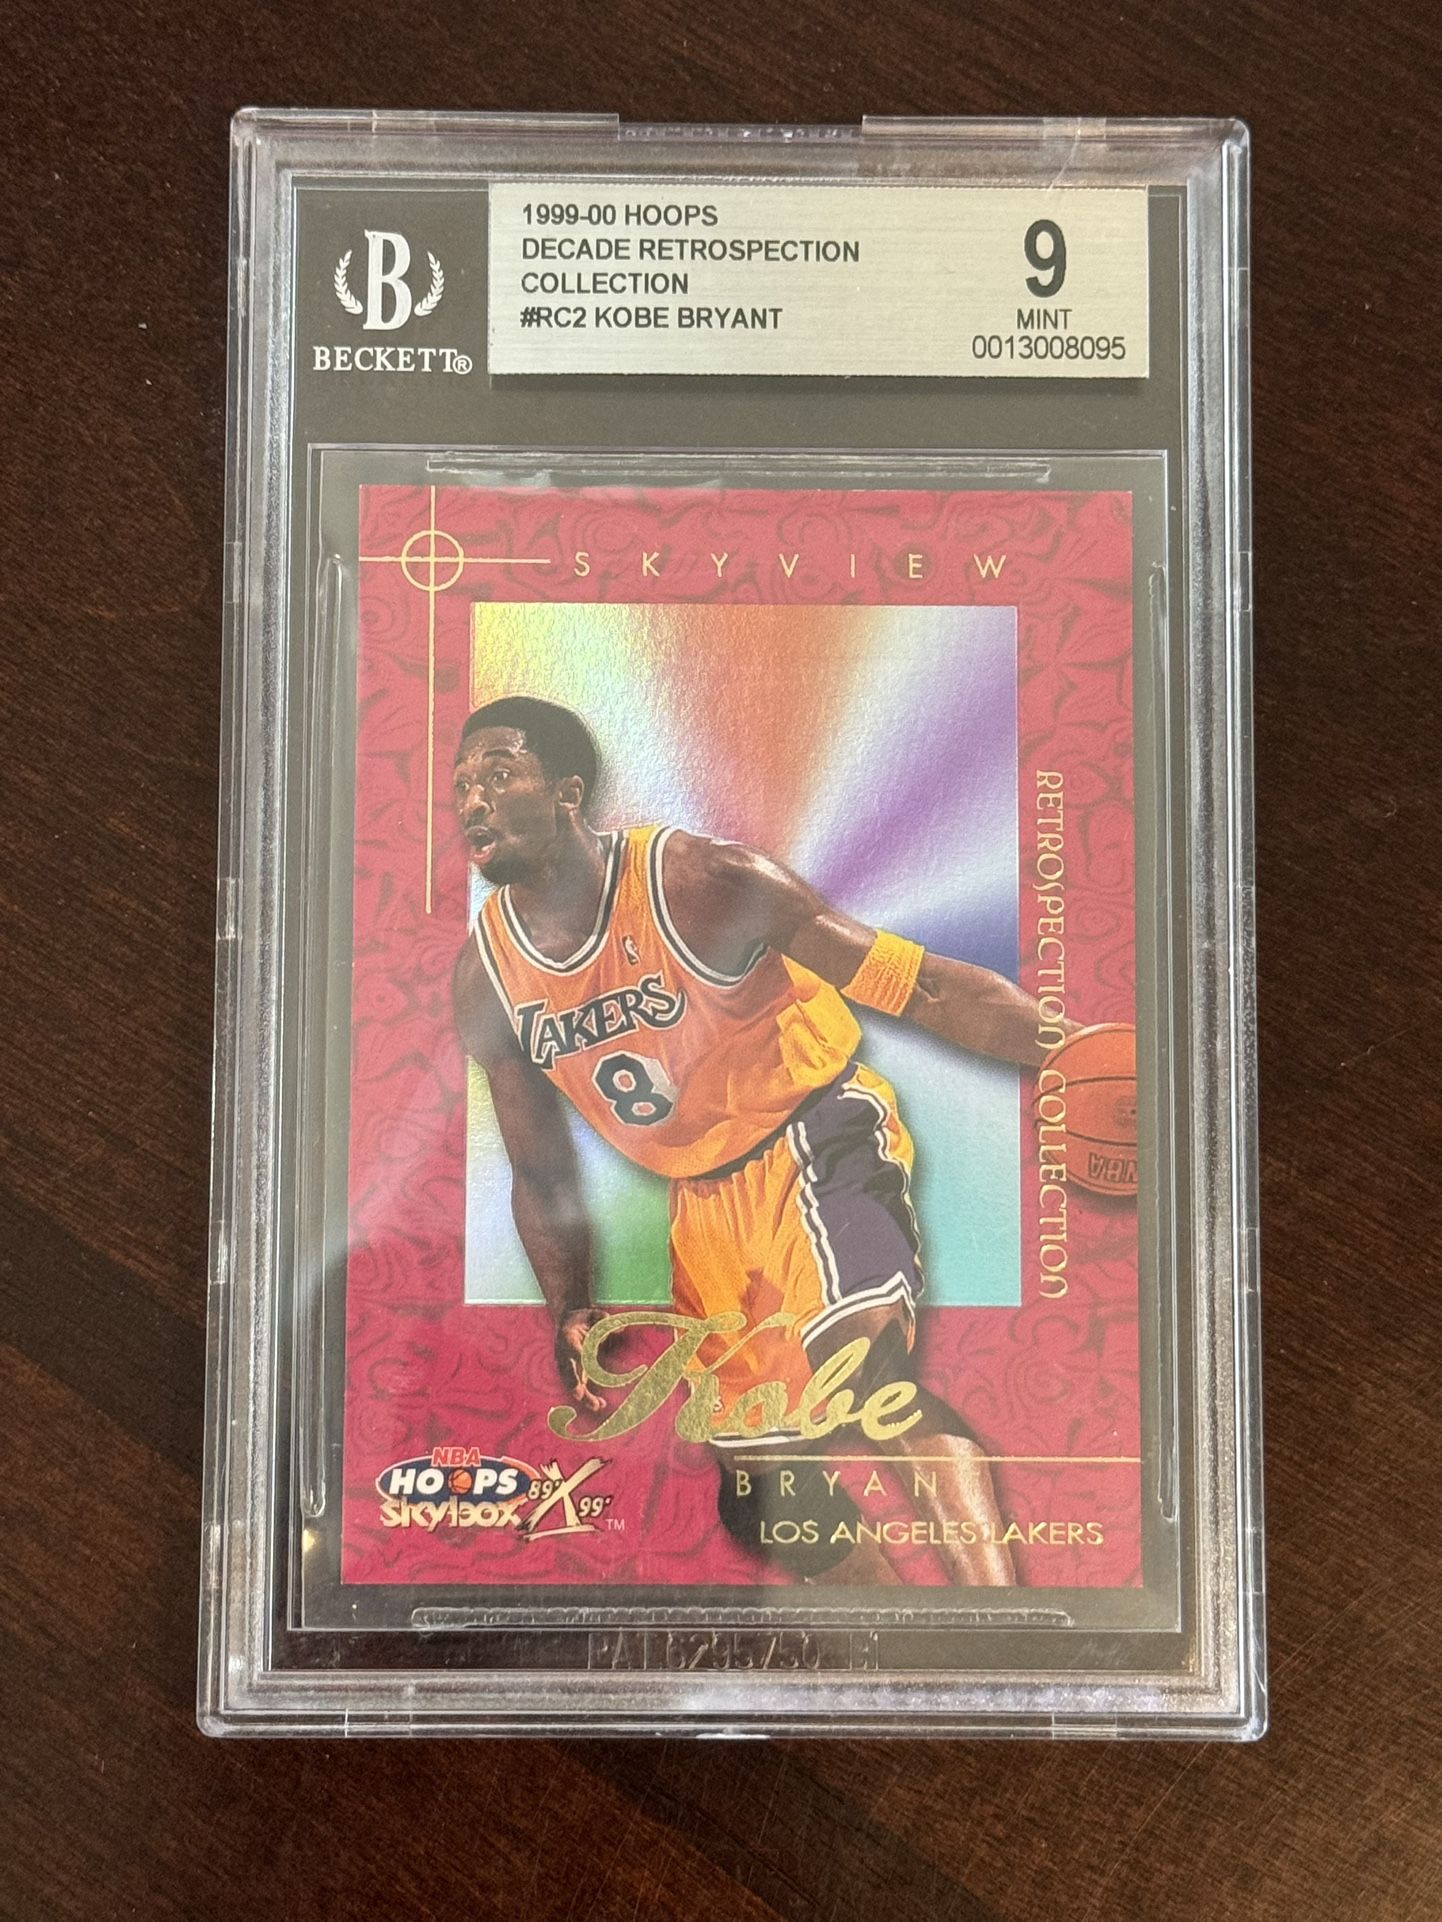 1999 Kobe Bryant Hoops Decade Retrospection Collection #RC2 BGS 9 LA Lakers  